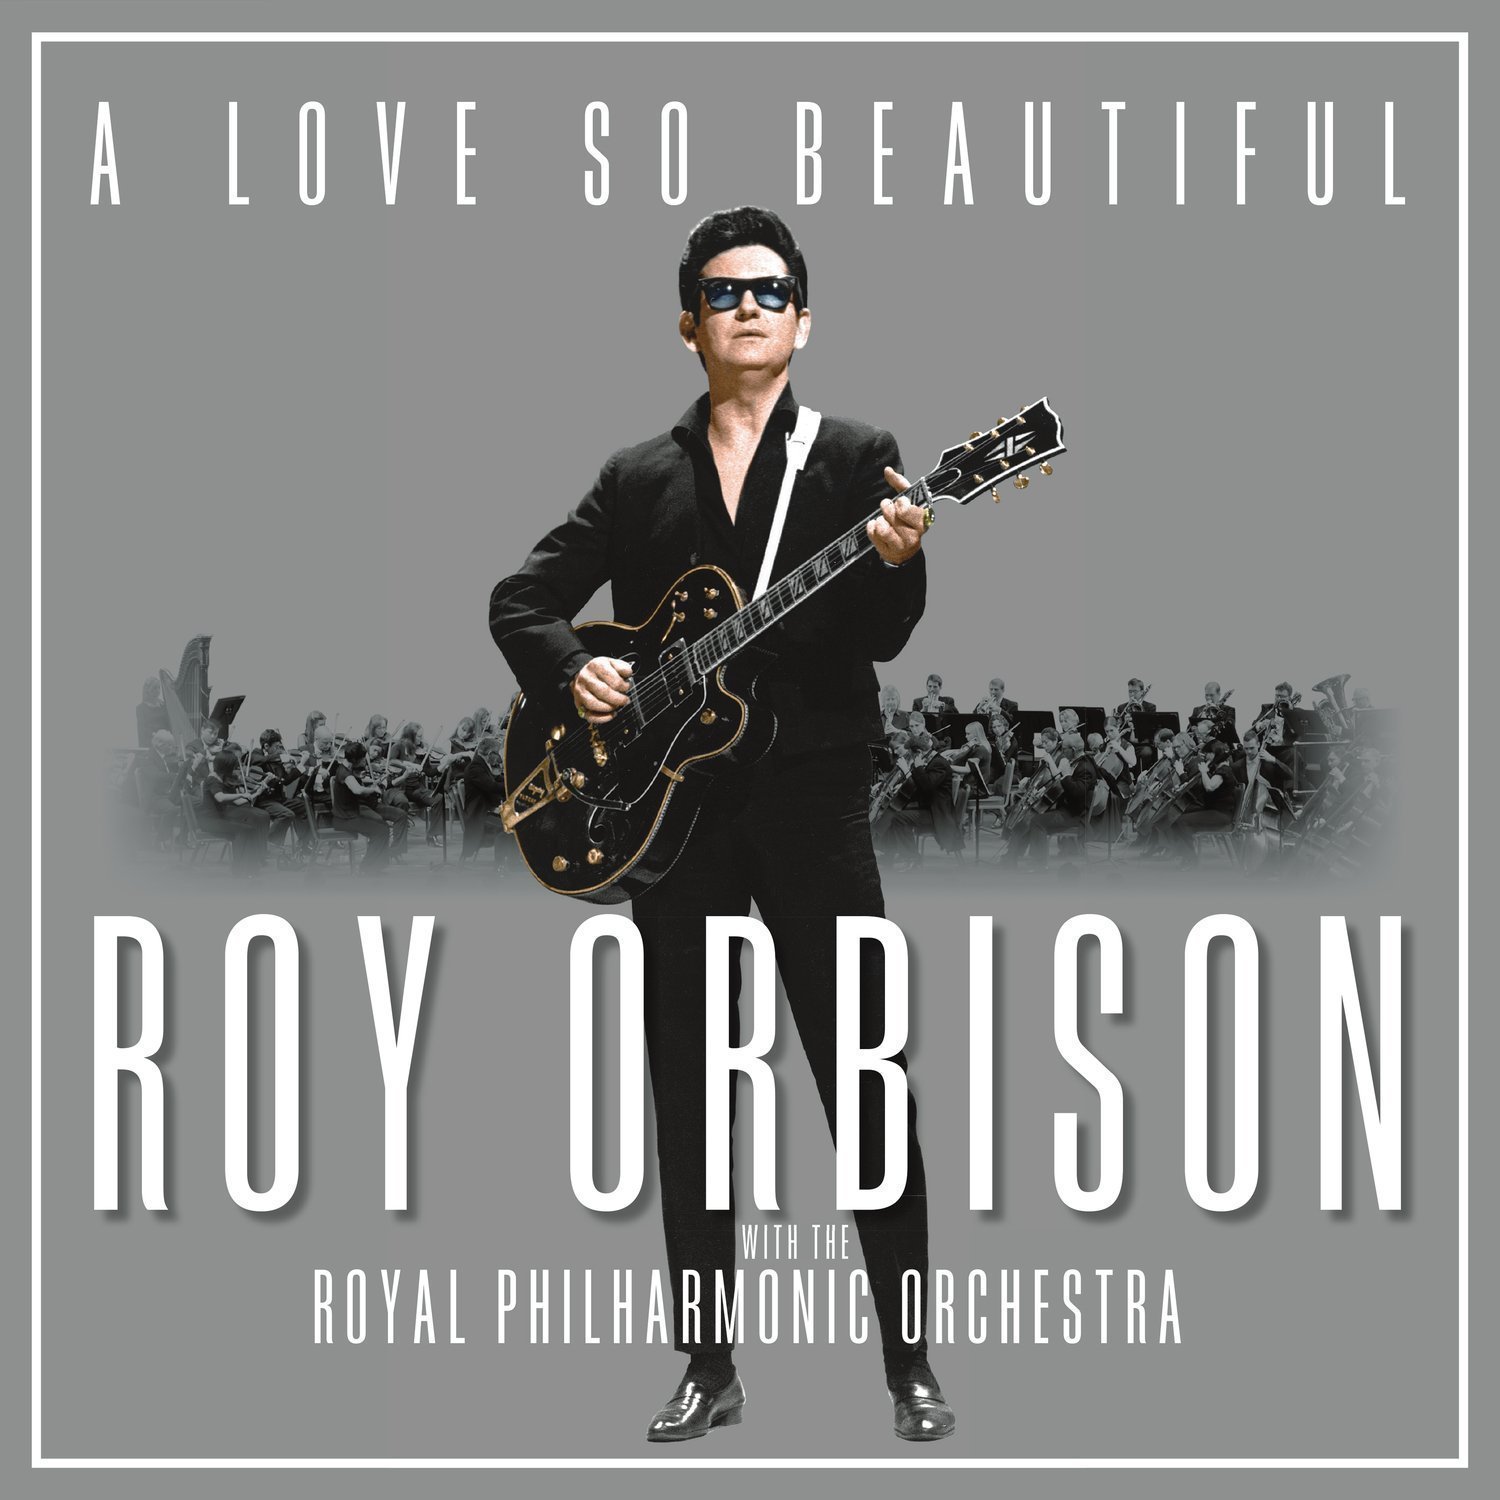 Roy Orbison A Love So Beautiful: Roy Orbison & the Royal Philharmonic Orchestra (LP) Roy Orbison